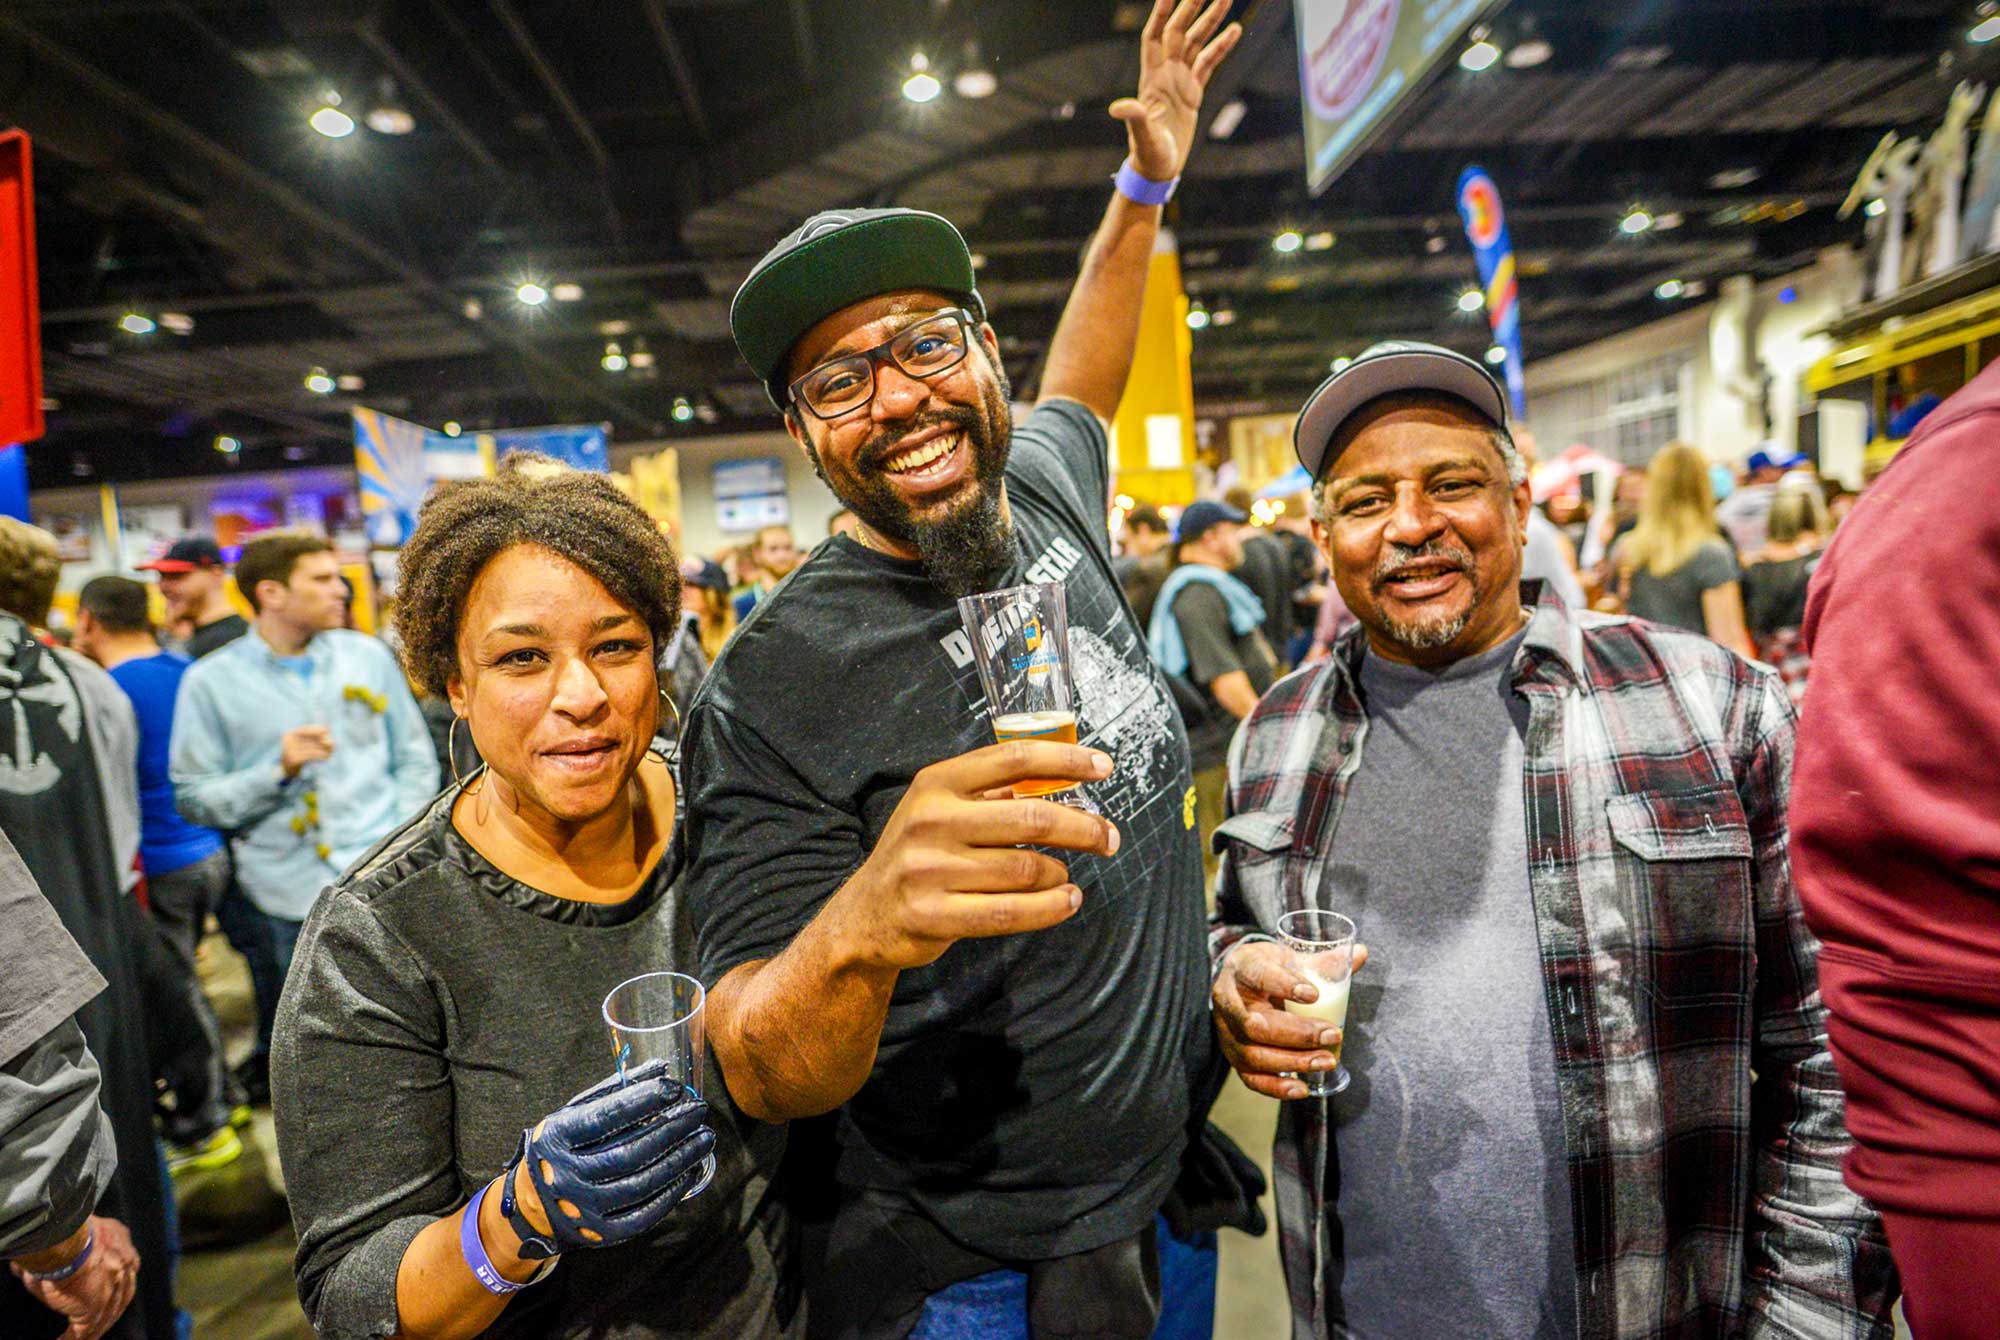 The Best of the Great American Beer Festival 2017